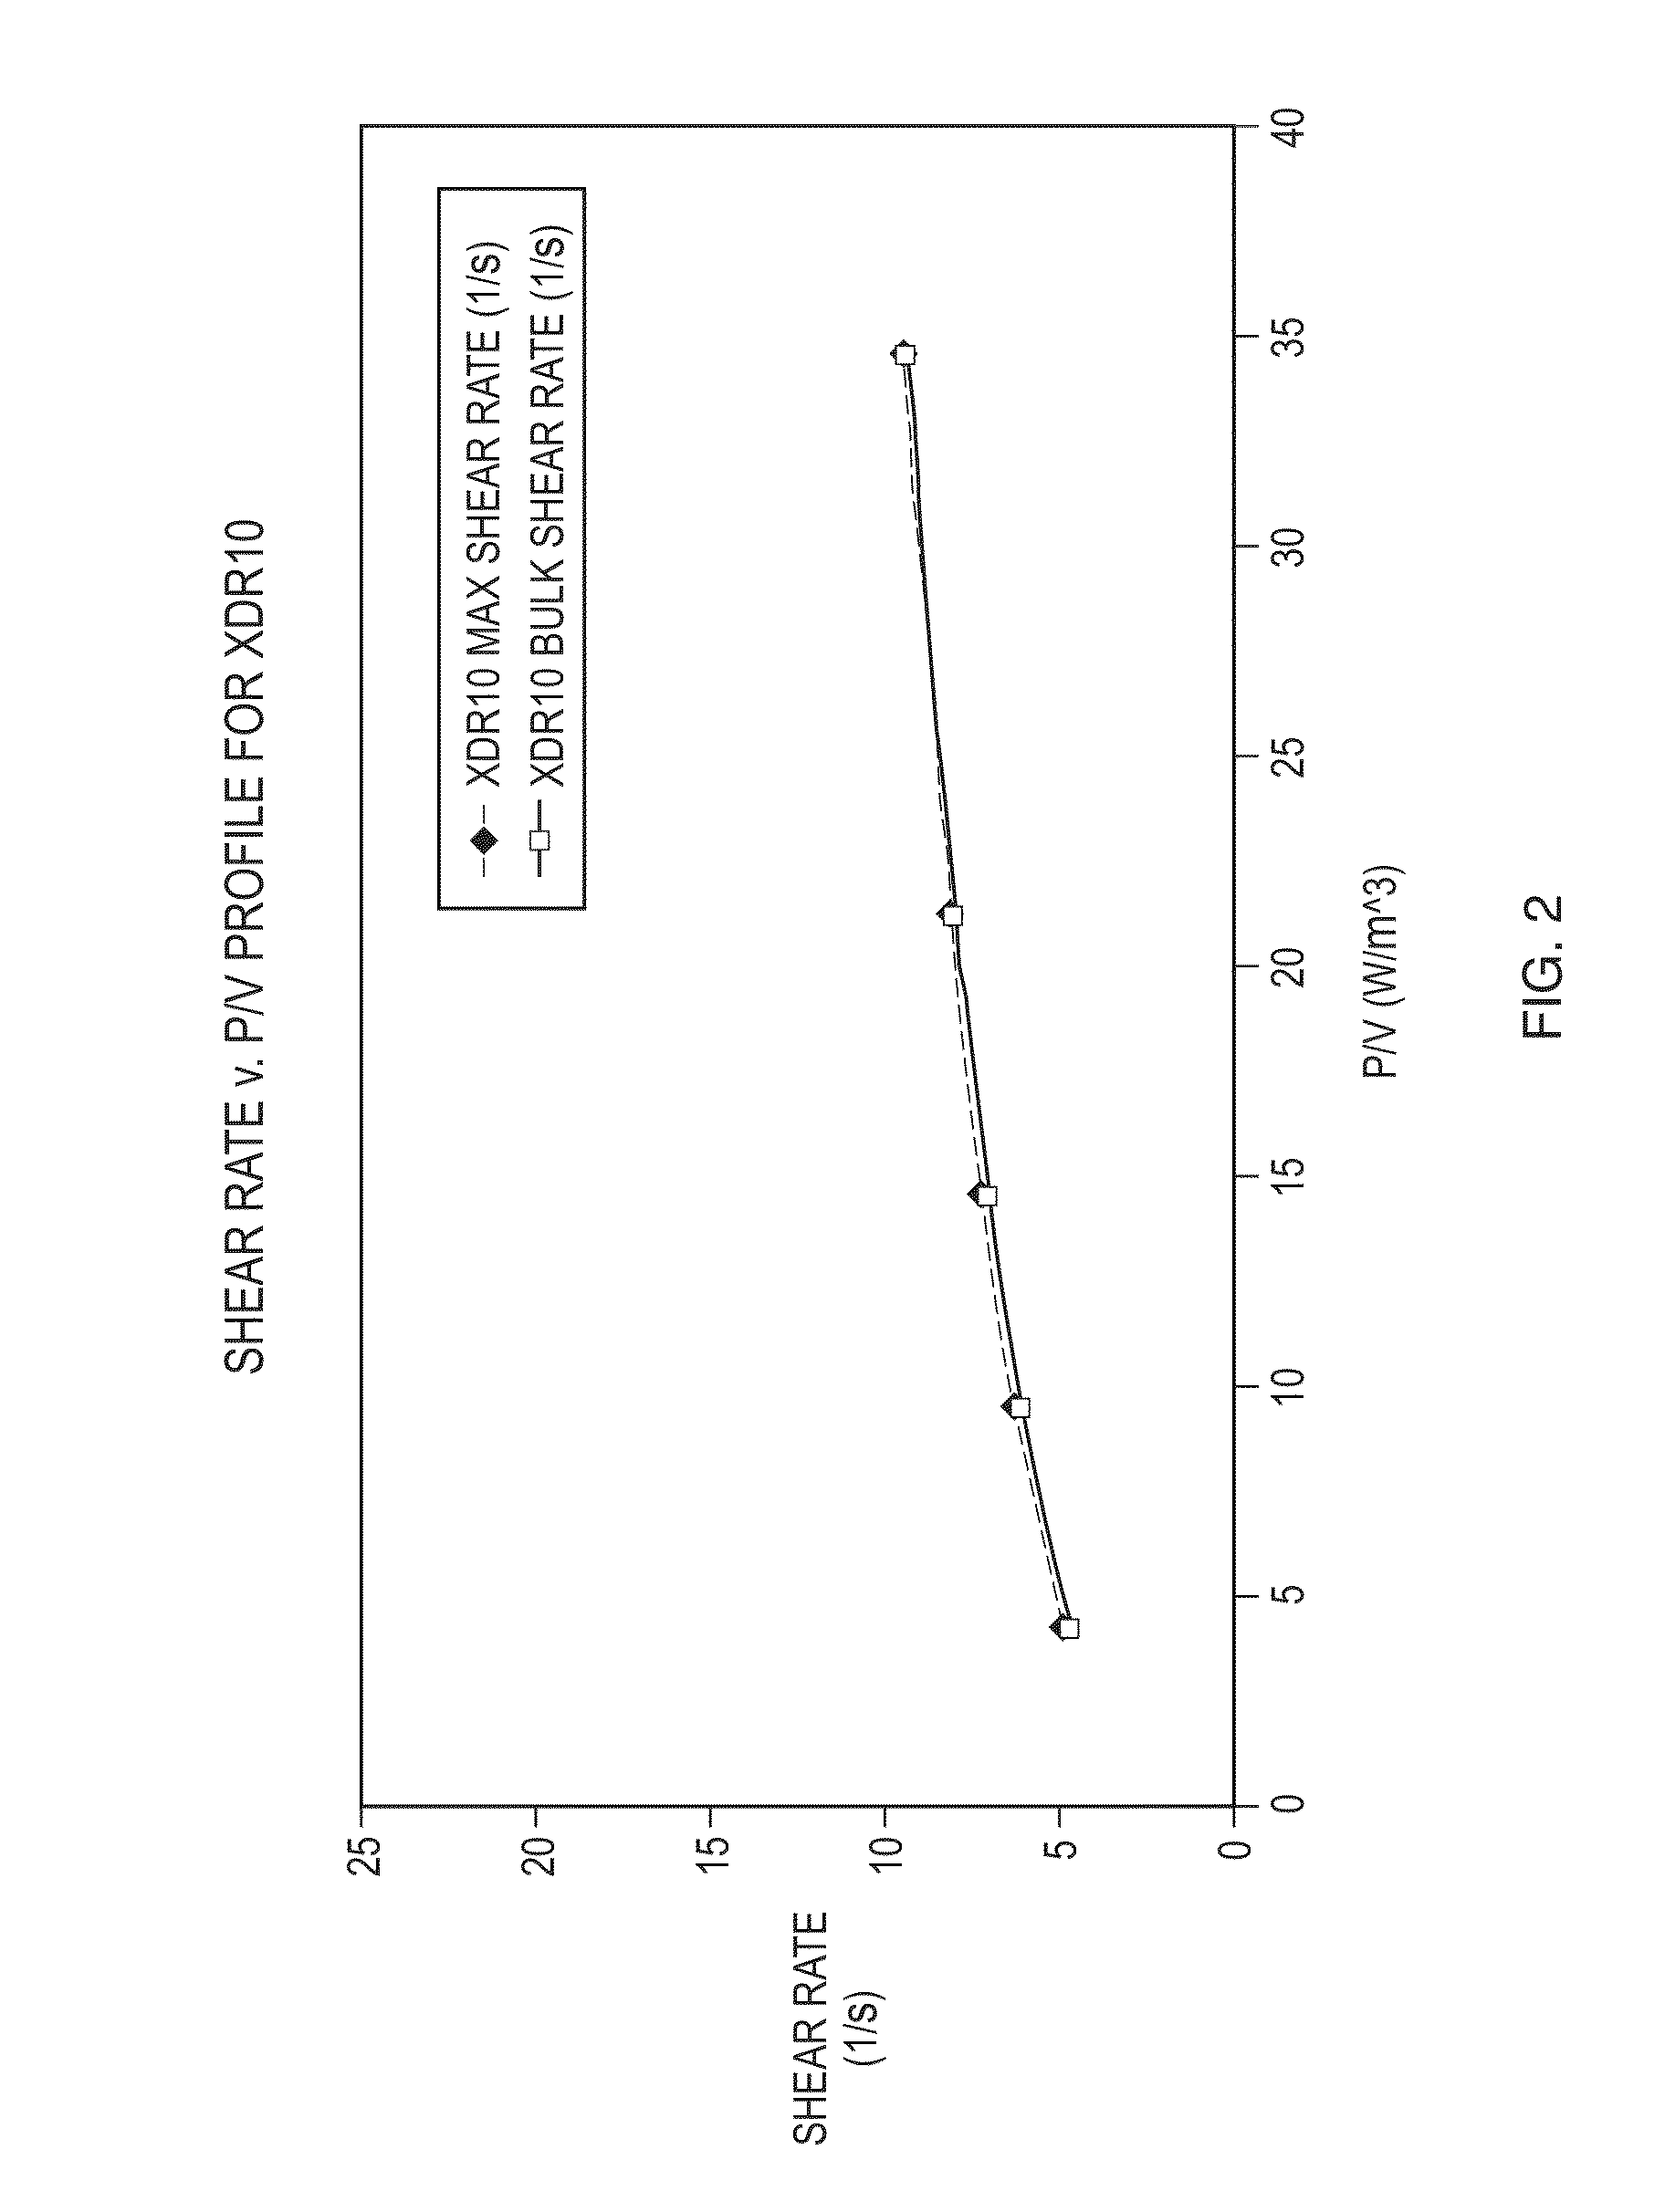 Linearly scalable single use bioreactor system